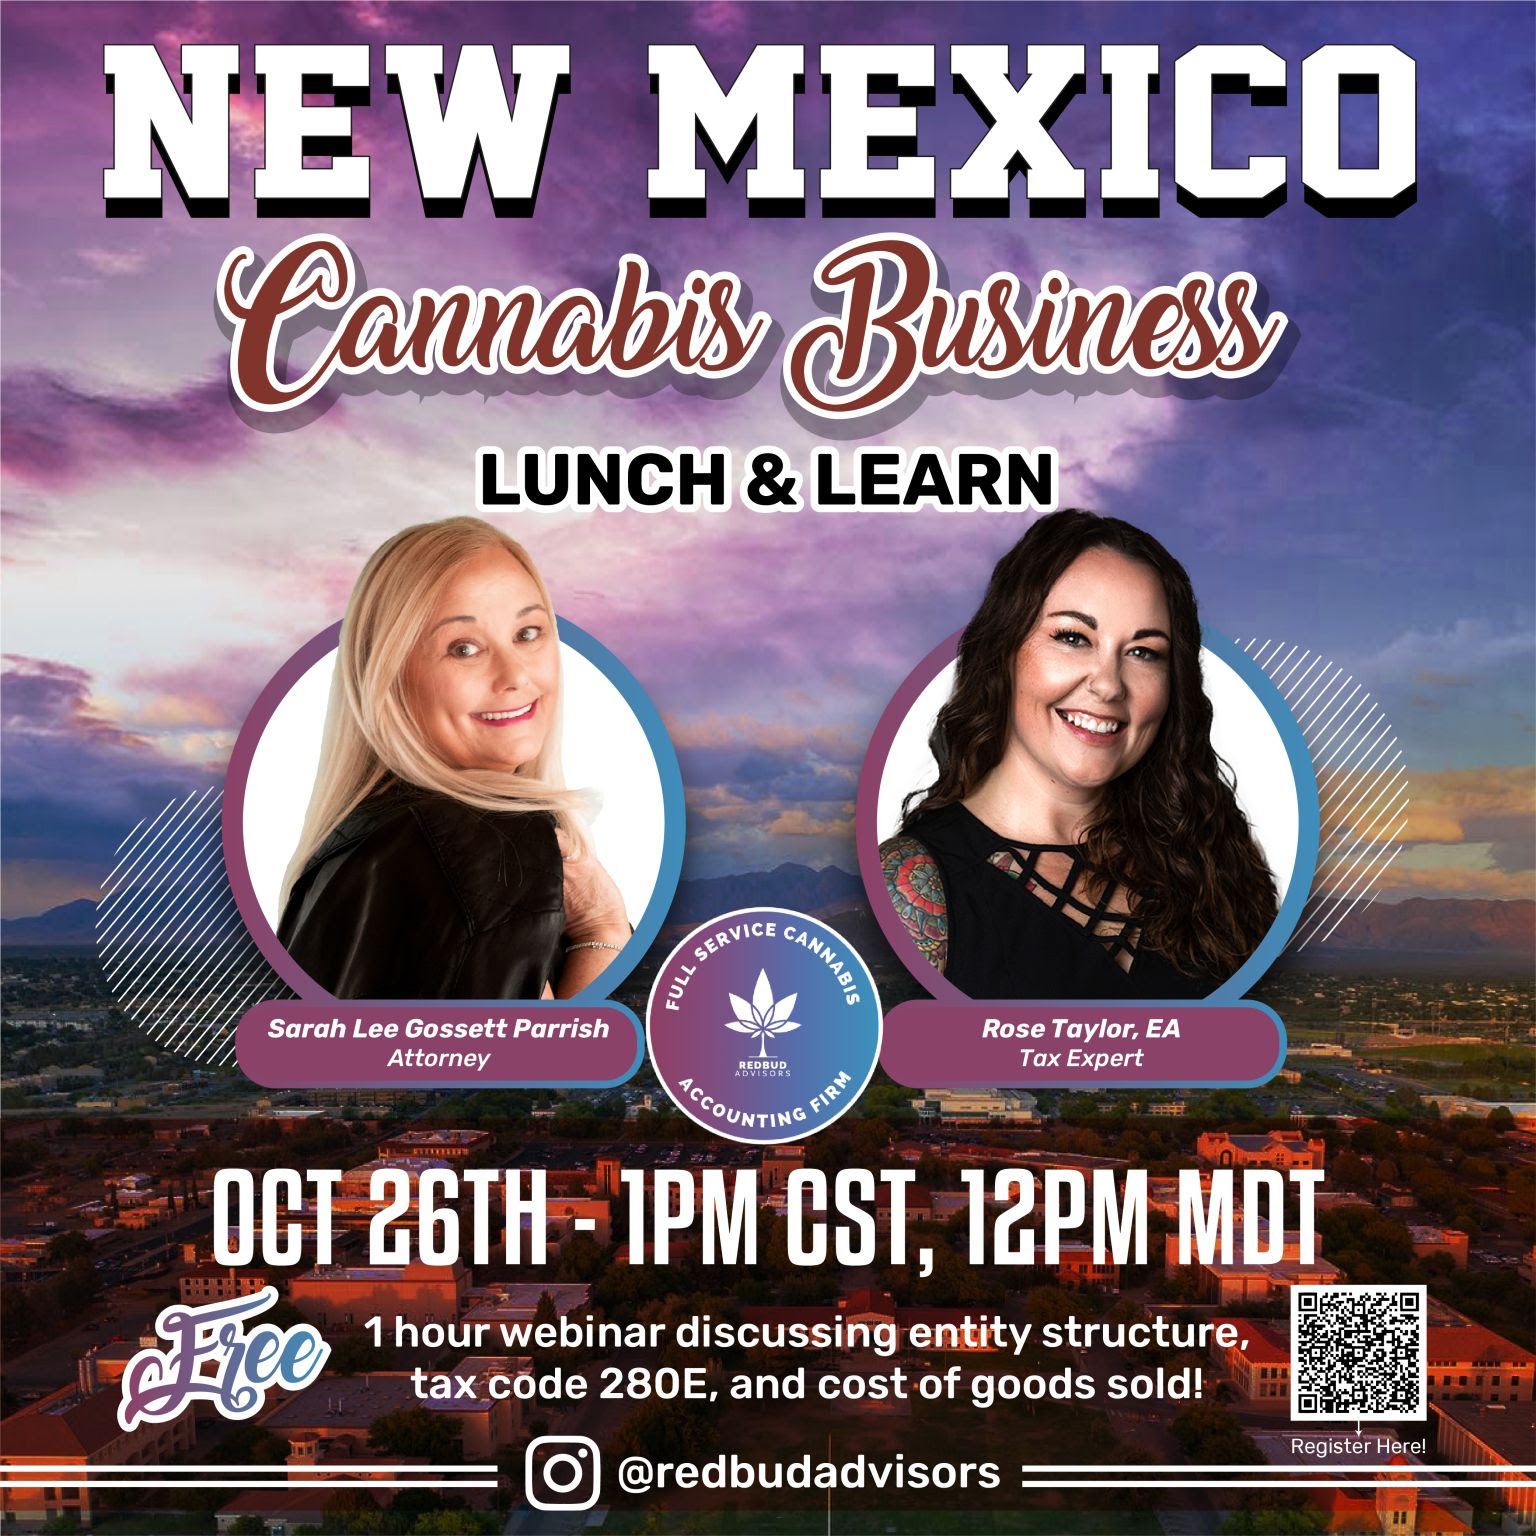 New Mexico Cannabis Business Lunch & Learn